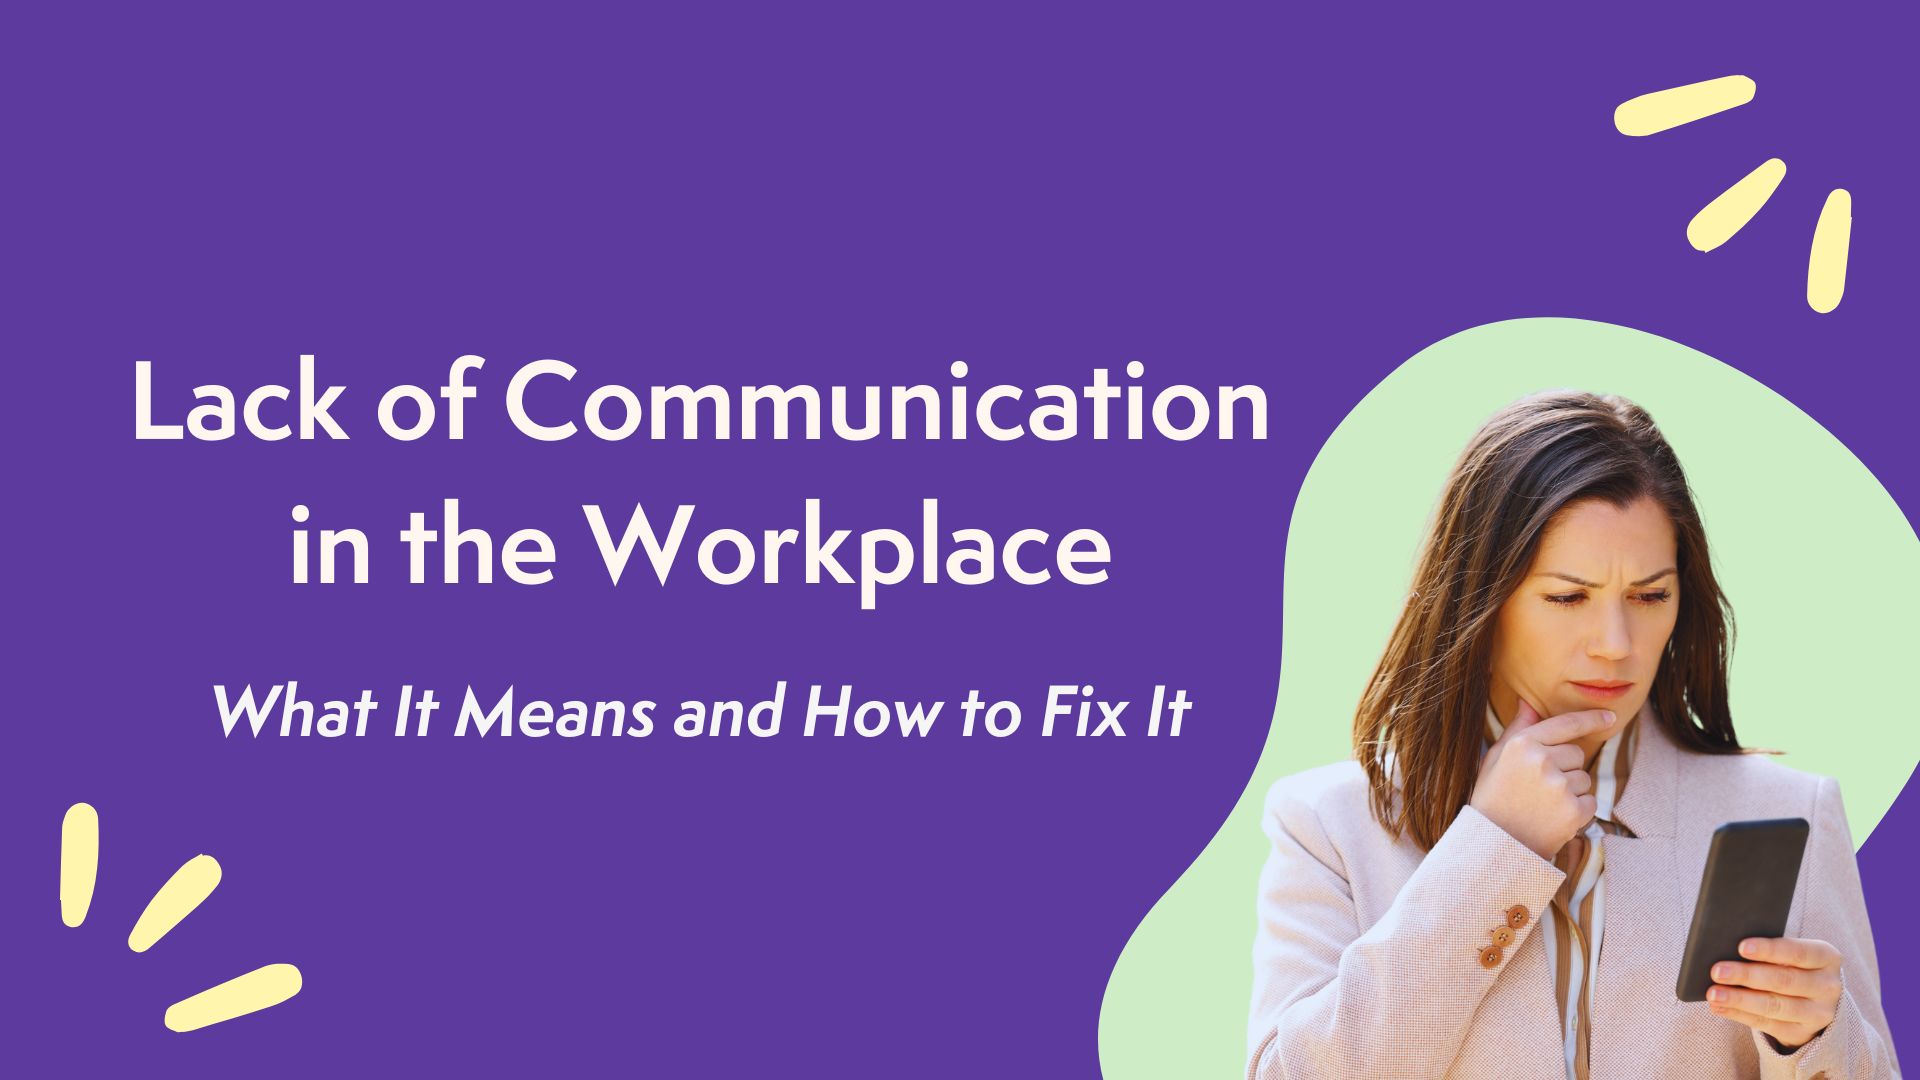 Lack of Communication in the Workplace: What It Means and How to Fix It